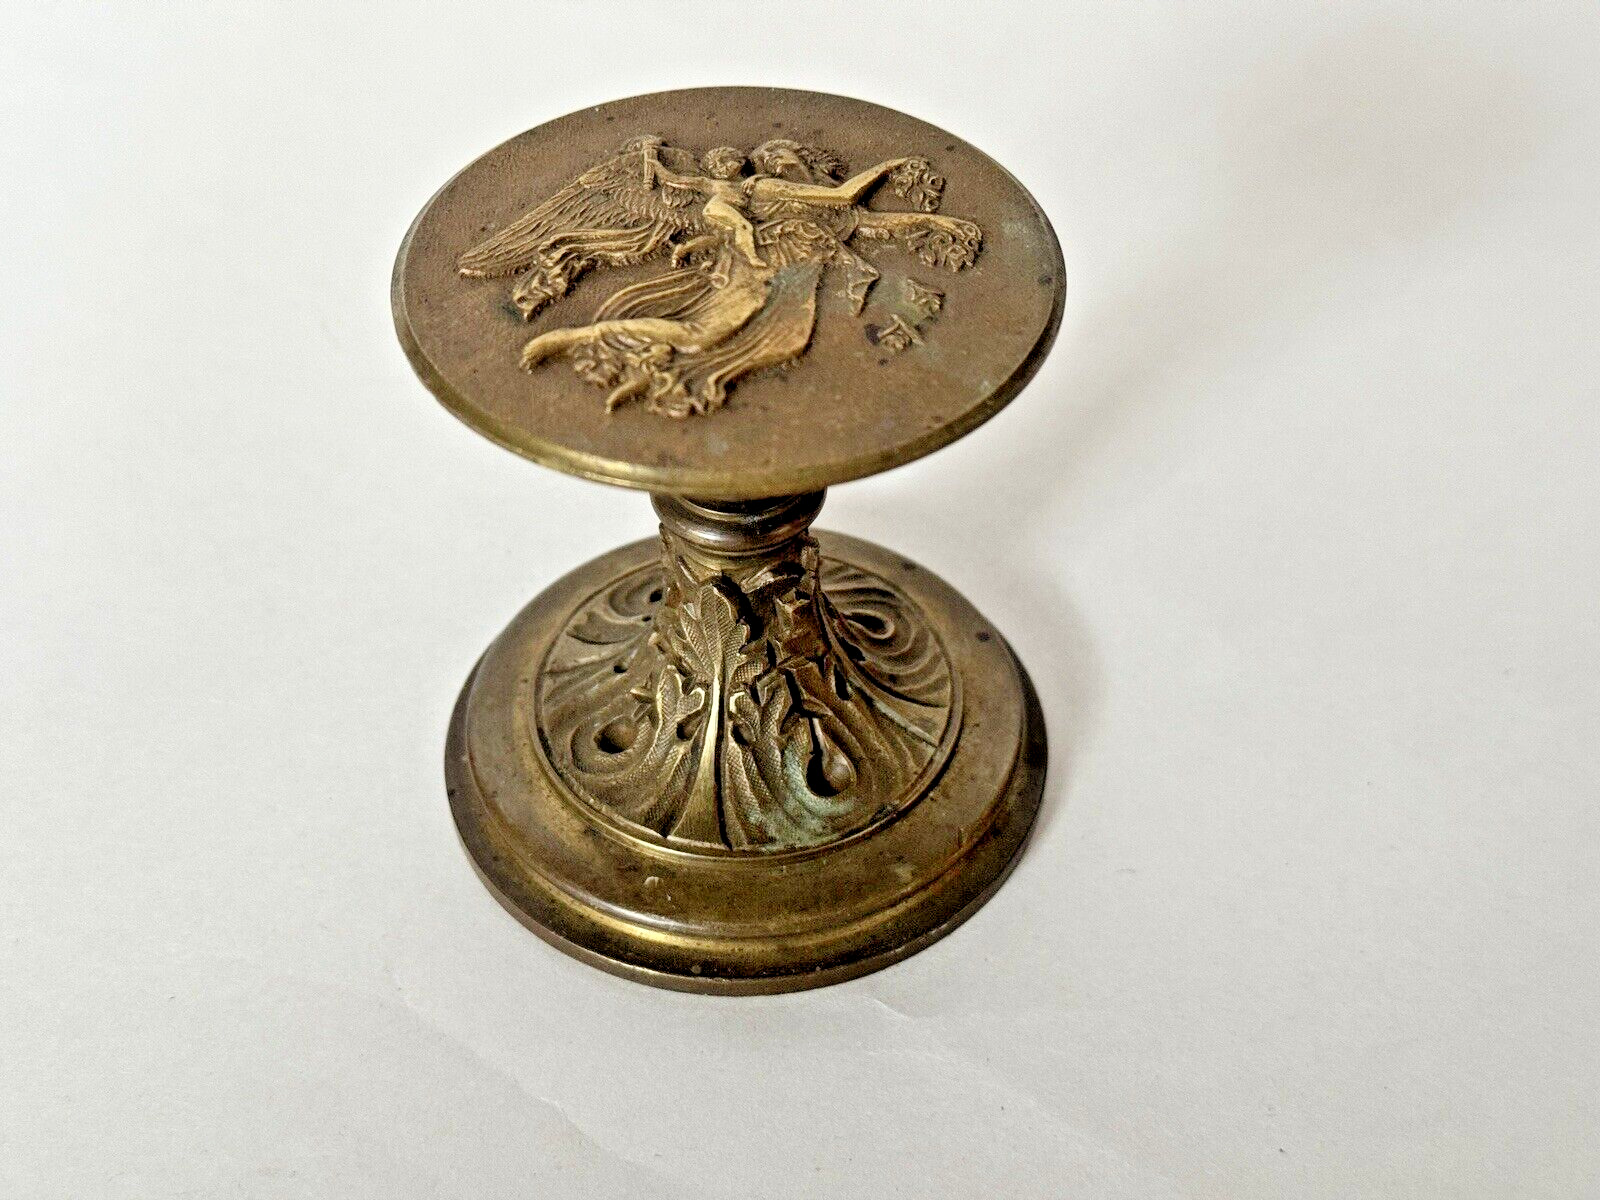 Small Antique Bronze Neoclassical Tazza Stand Angels with Cherub/Putti on Back